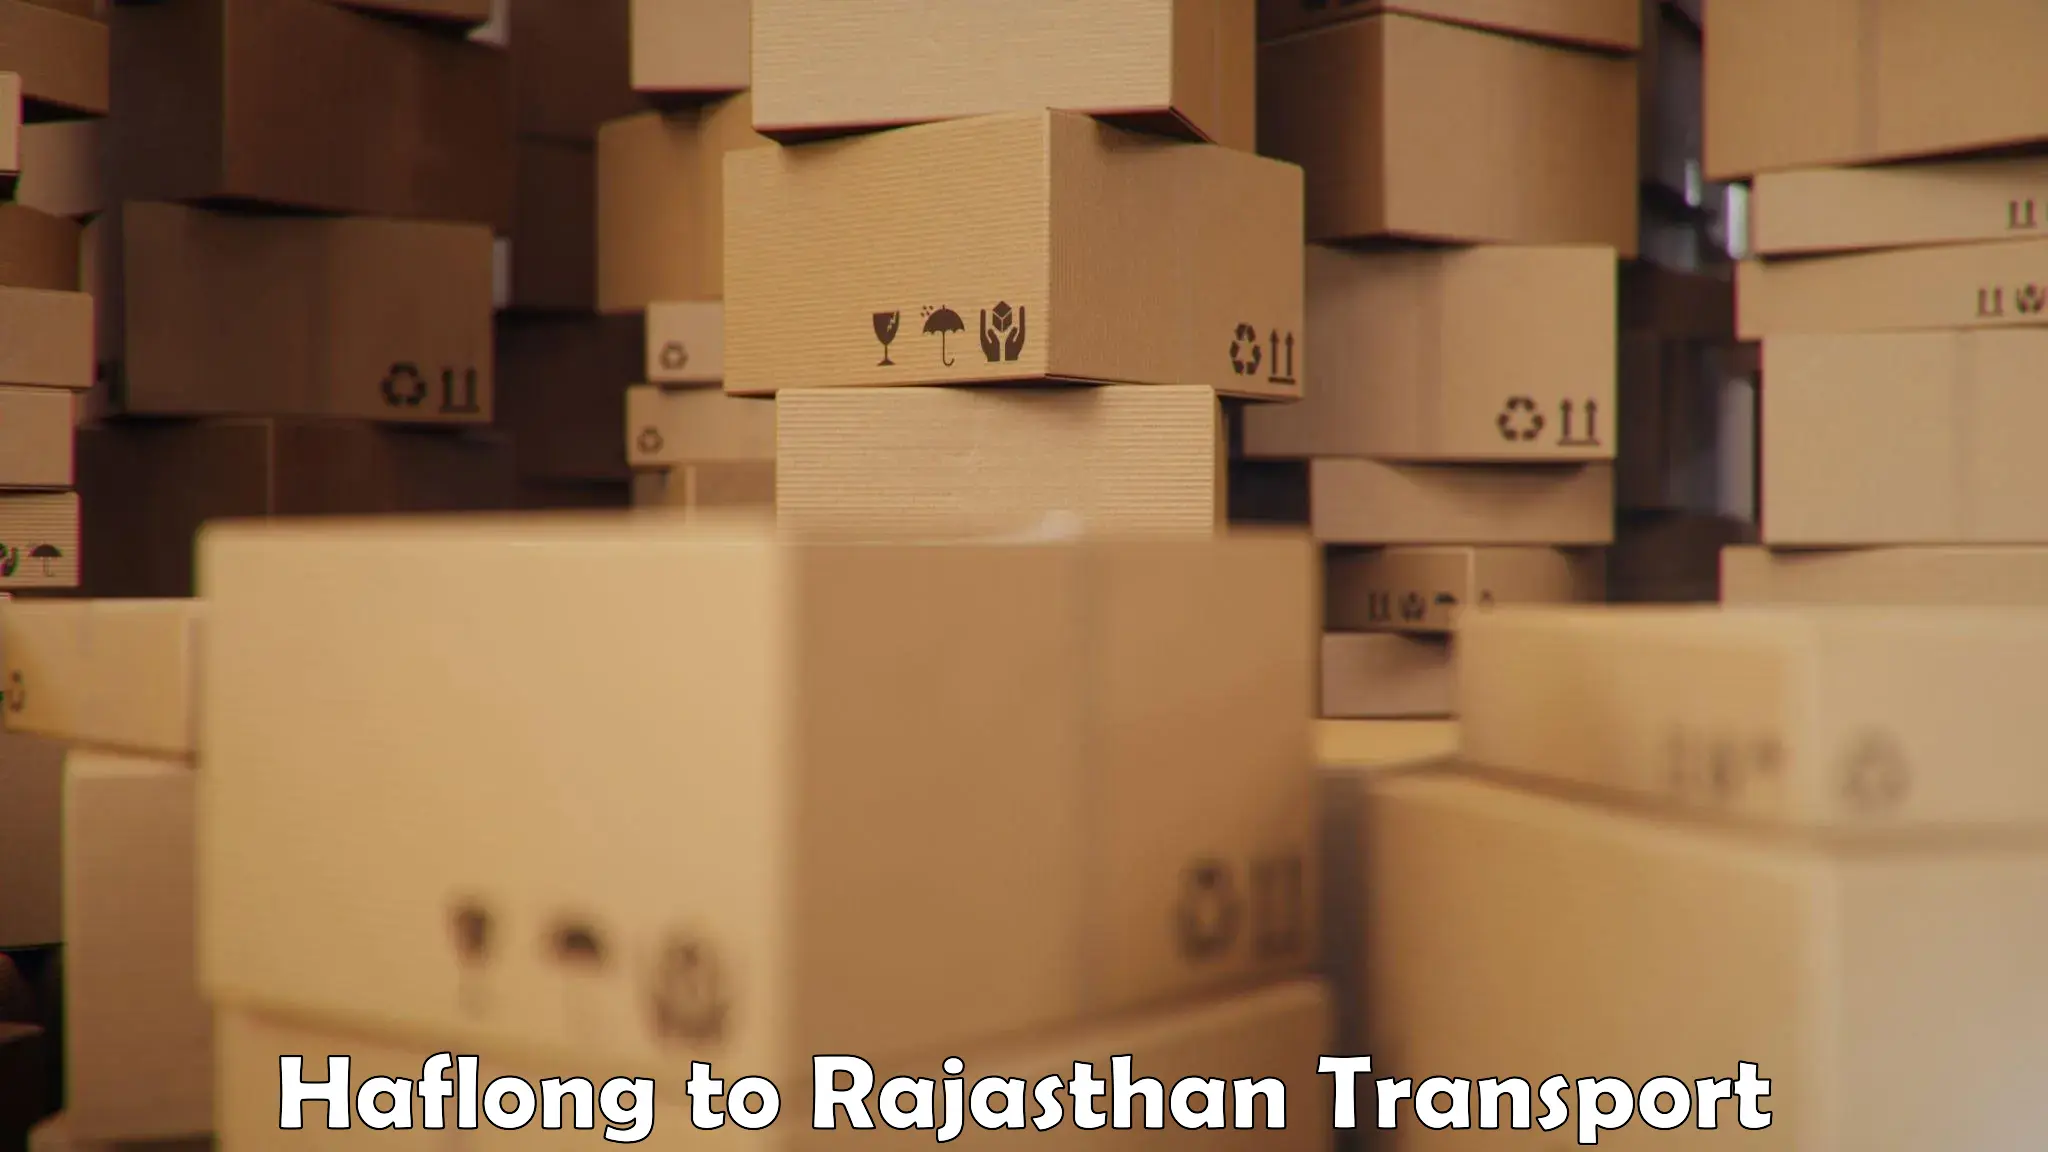 Commercial transport service Haflong to Rajasthan